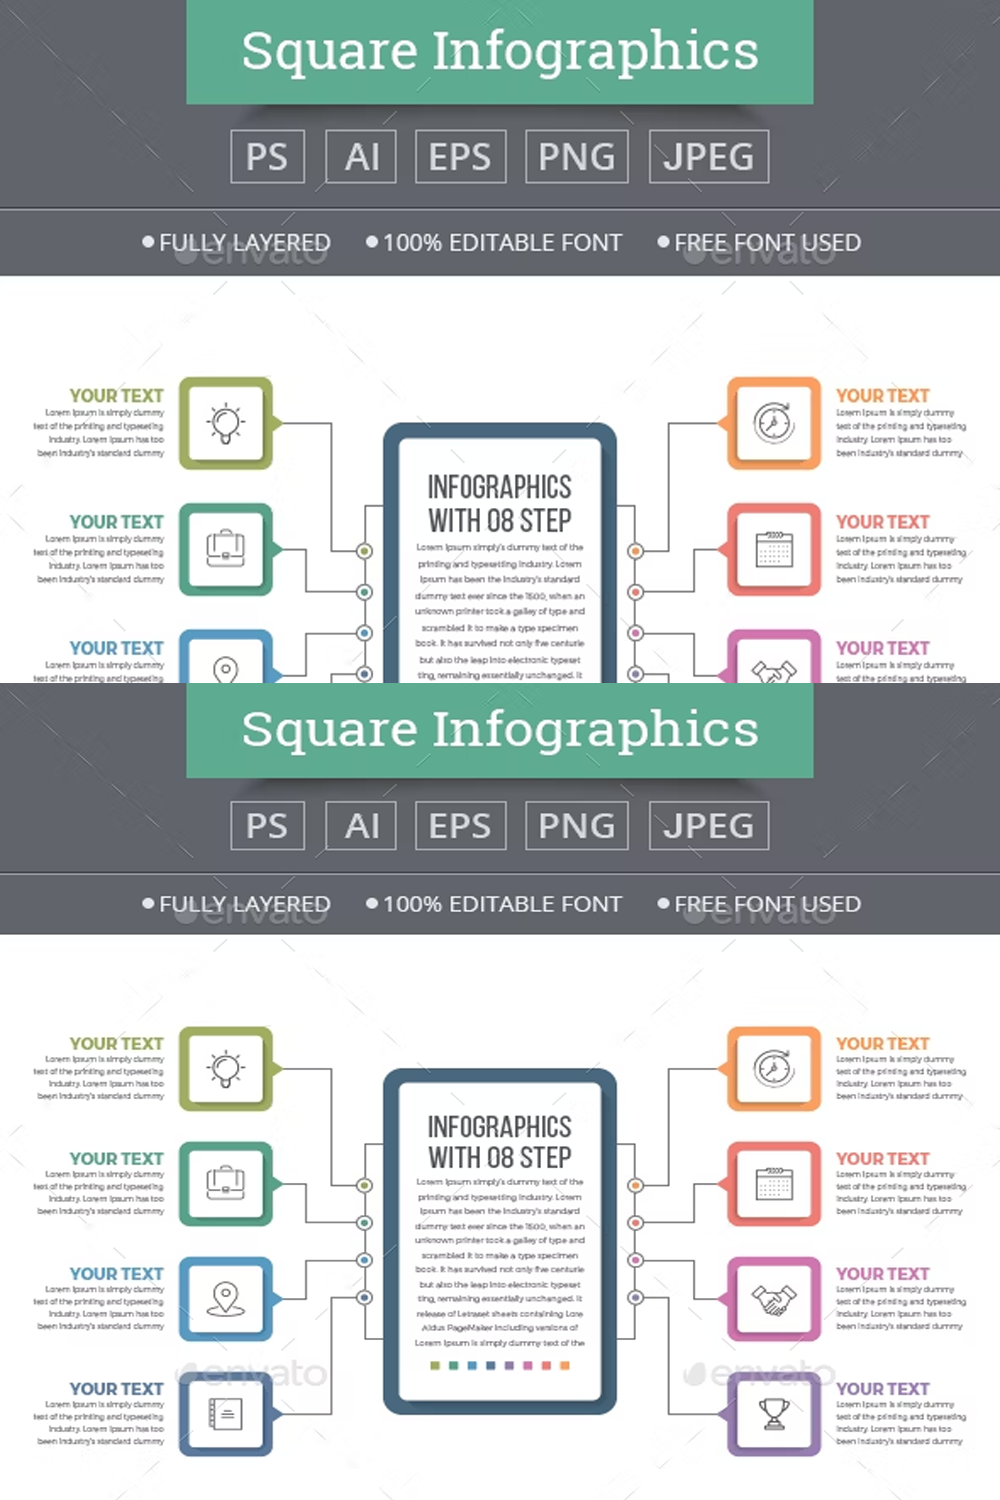 Illustrations rounded square infographics with 08 steps of pinterest.